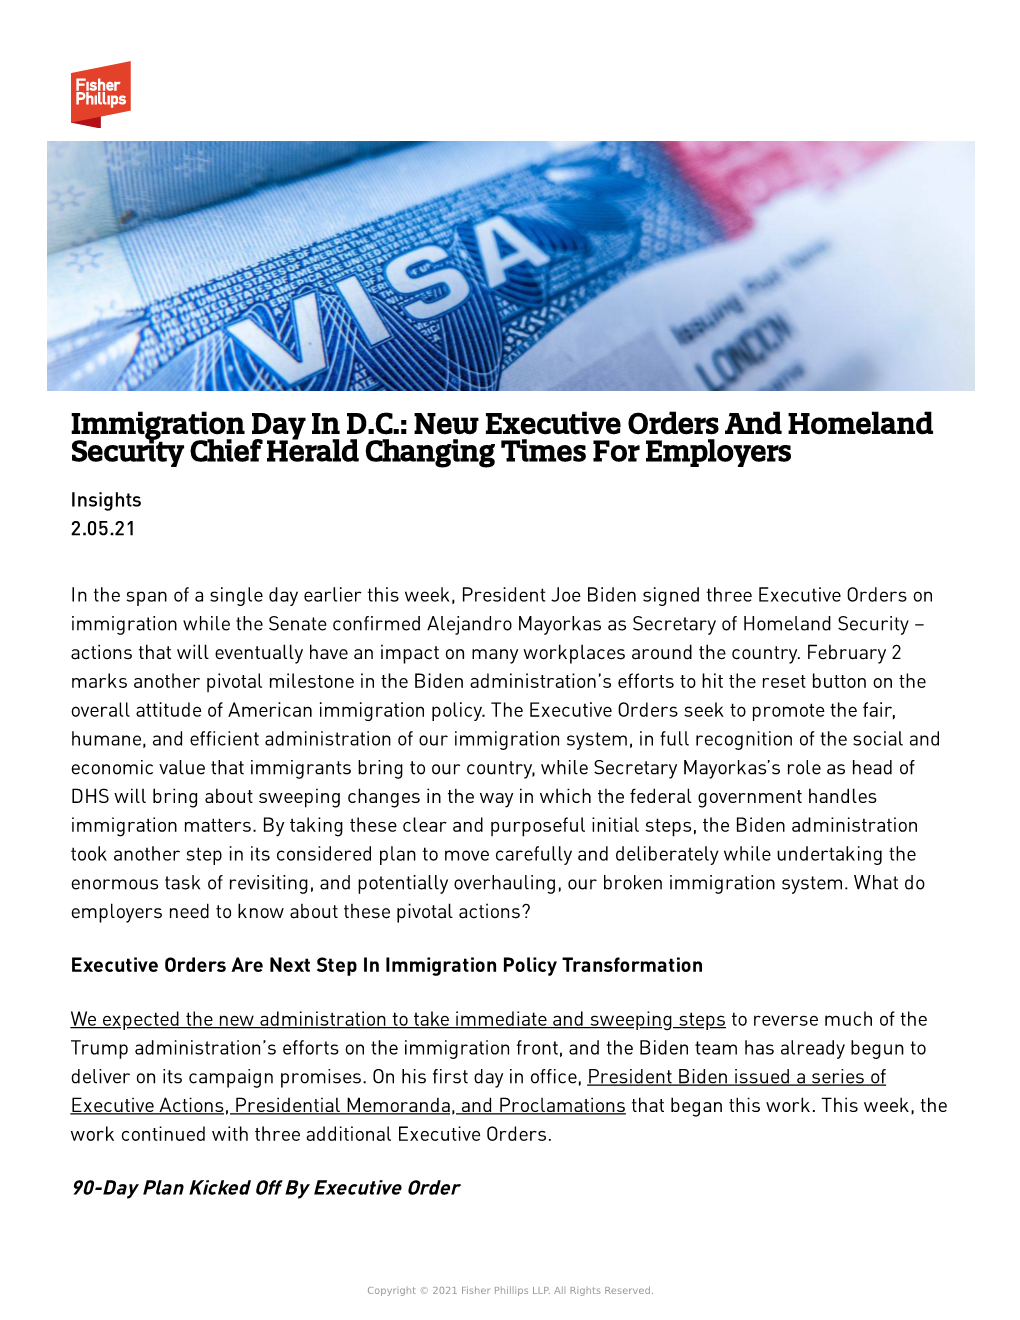 Immigration Day in D.C.: New Executive Orders and Homeland Security Chief Herald Changing Times for Employers Insights 2.05.21